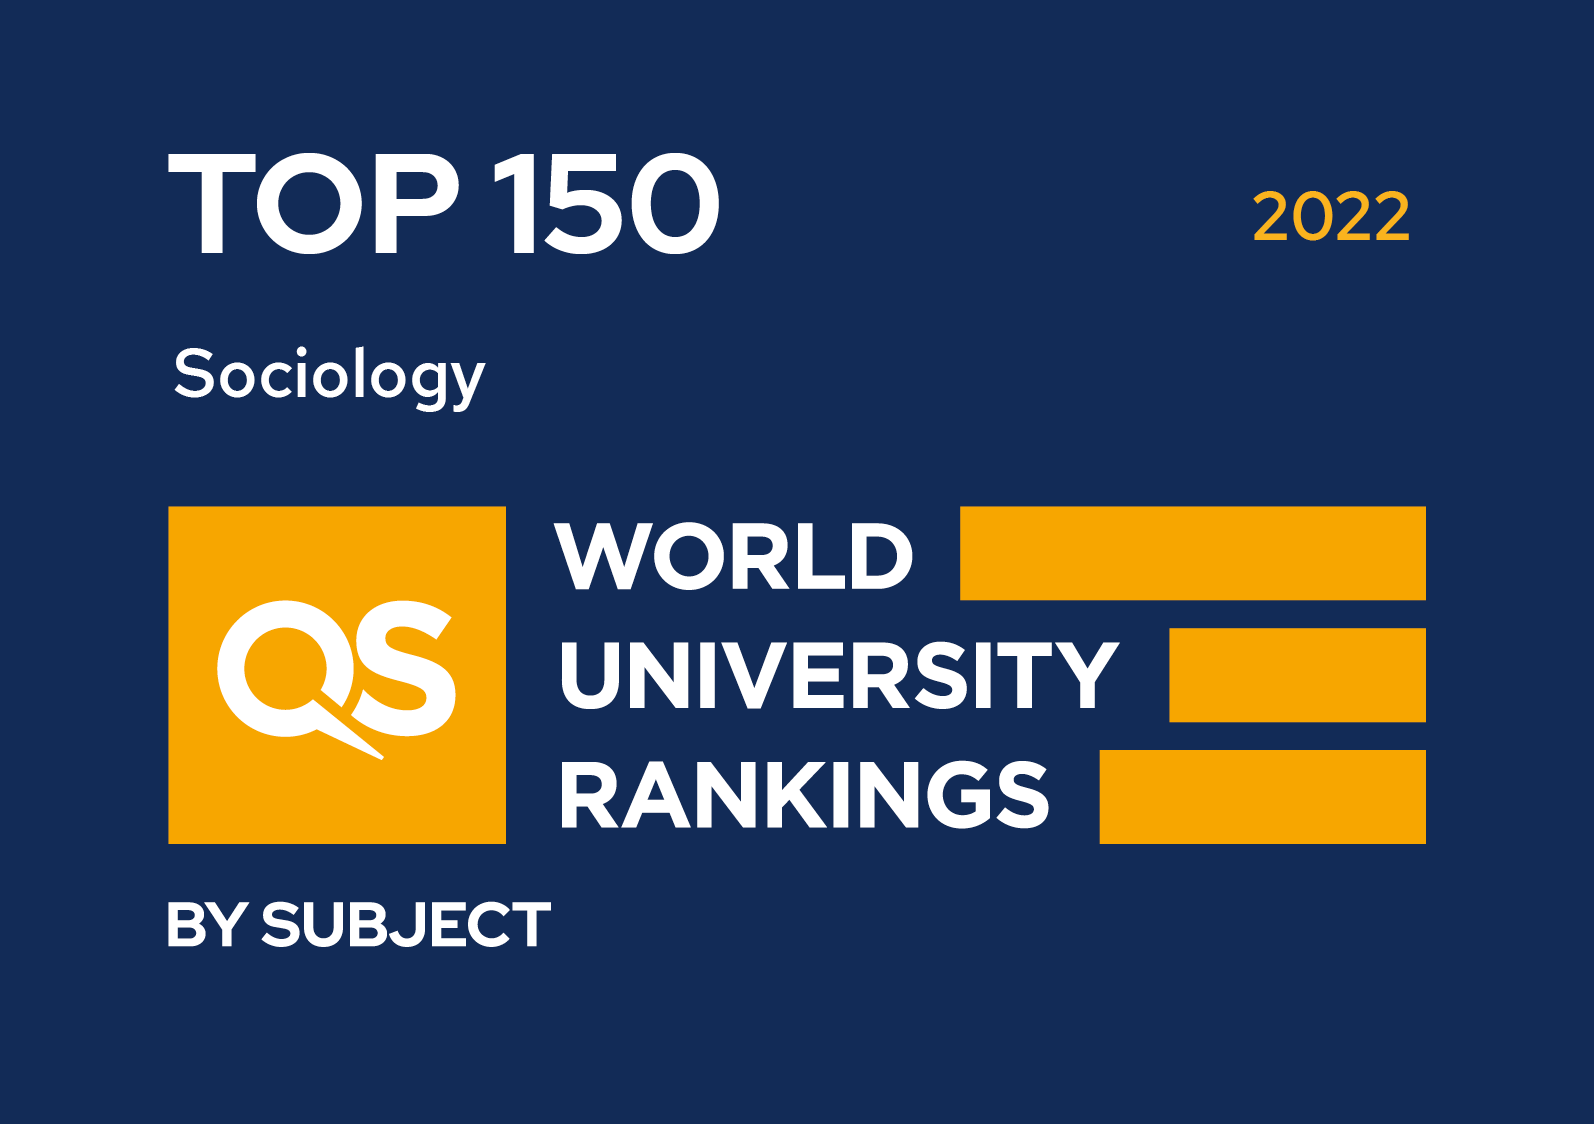 Western is in the top 150 in the world for sociology